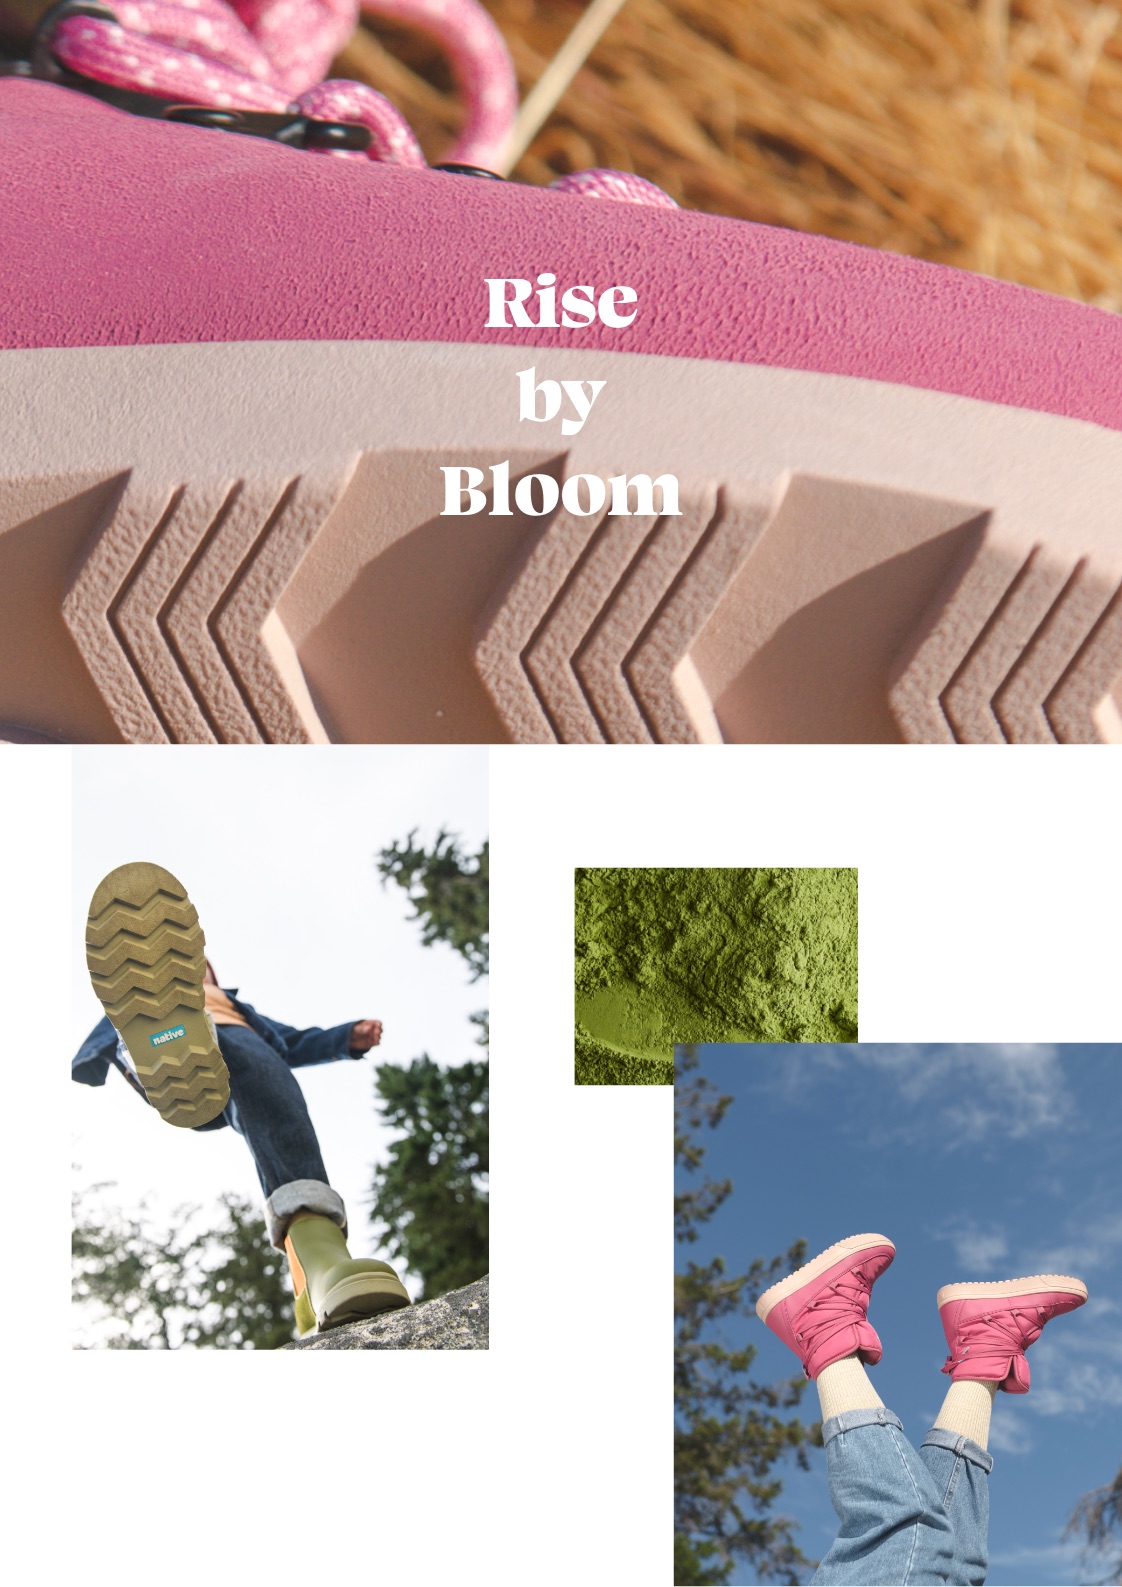 RISE BY BLOOM